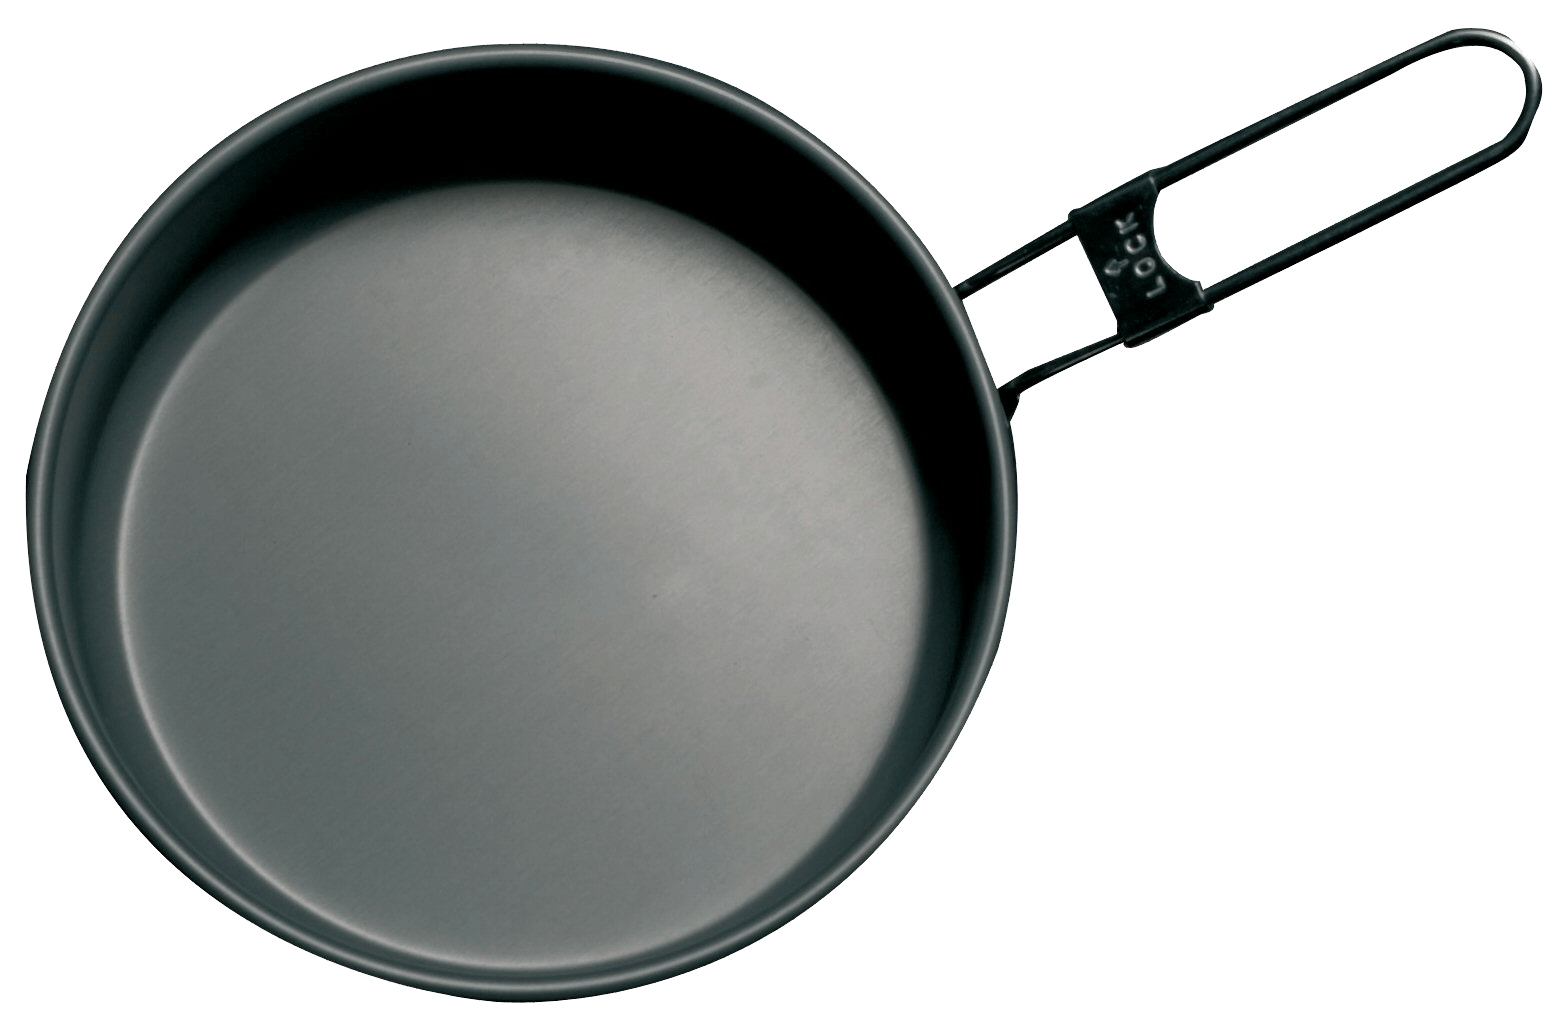 Egg and frying pan - STEP / I